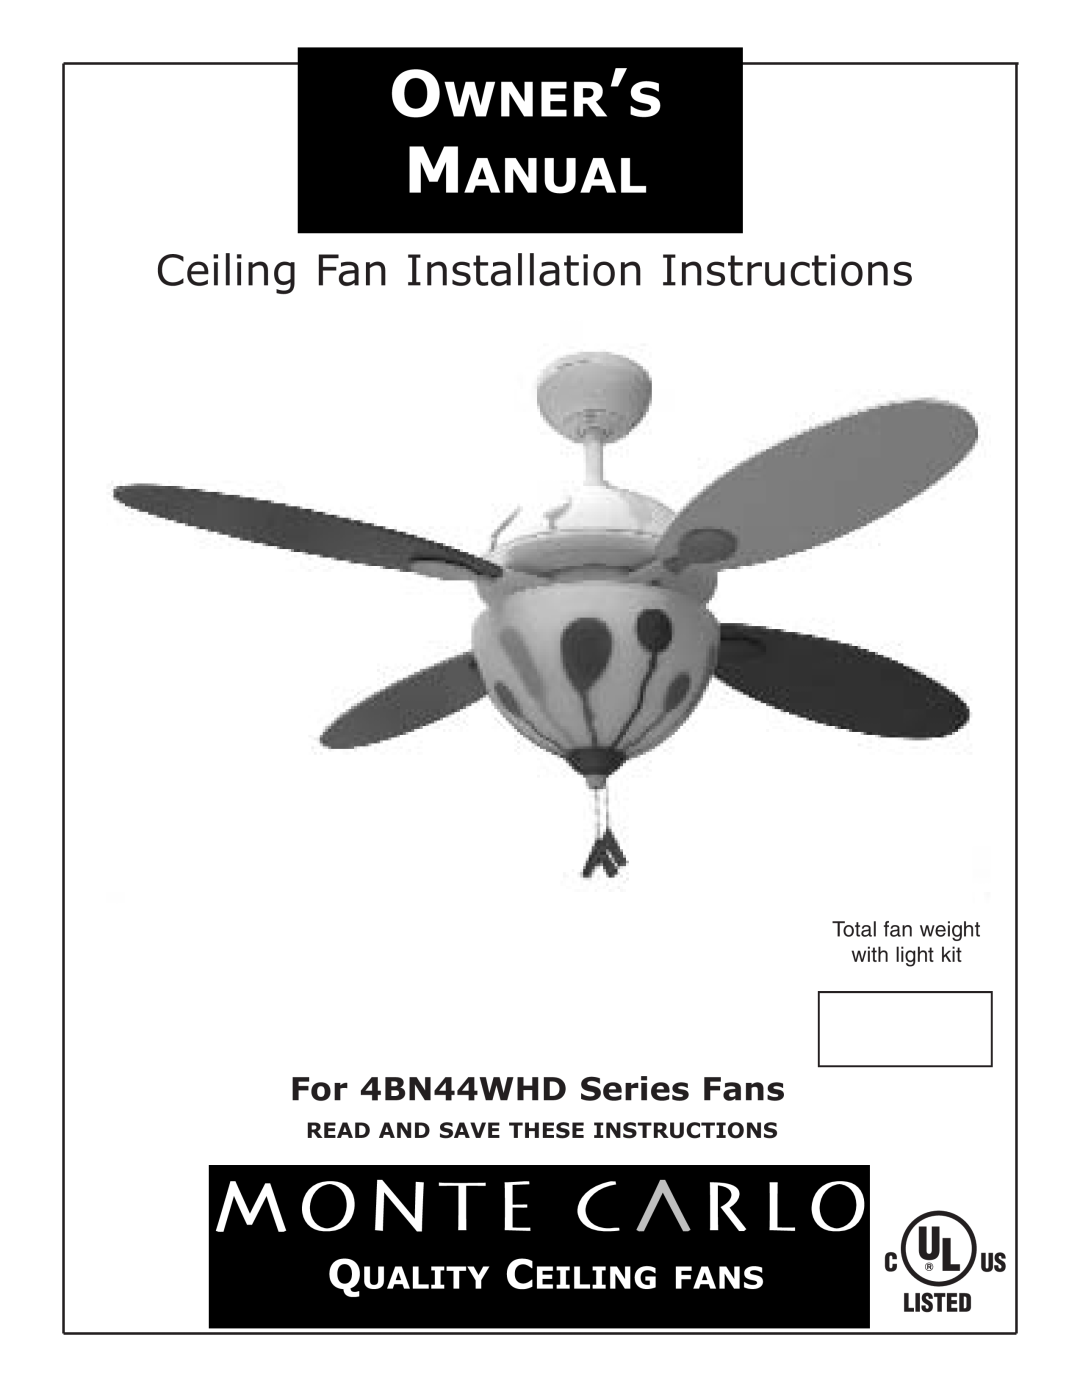 Monte Carlo Fan Company installation instructions For 4BN44WHD Series Fans, Ceiling Fan Installation Instructions 